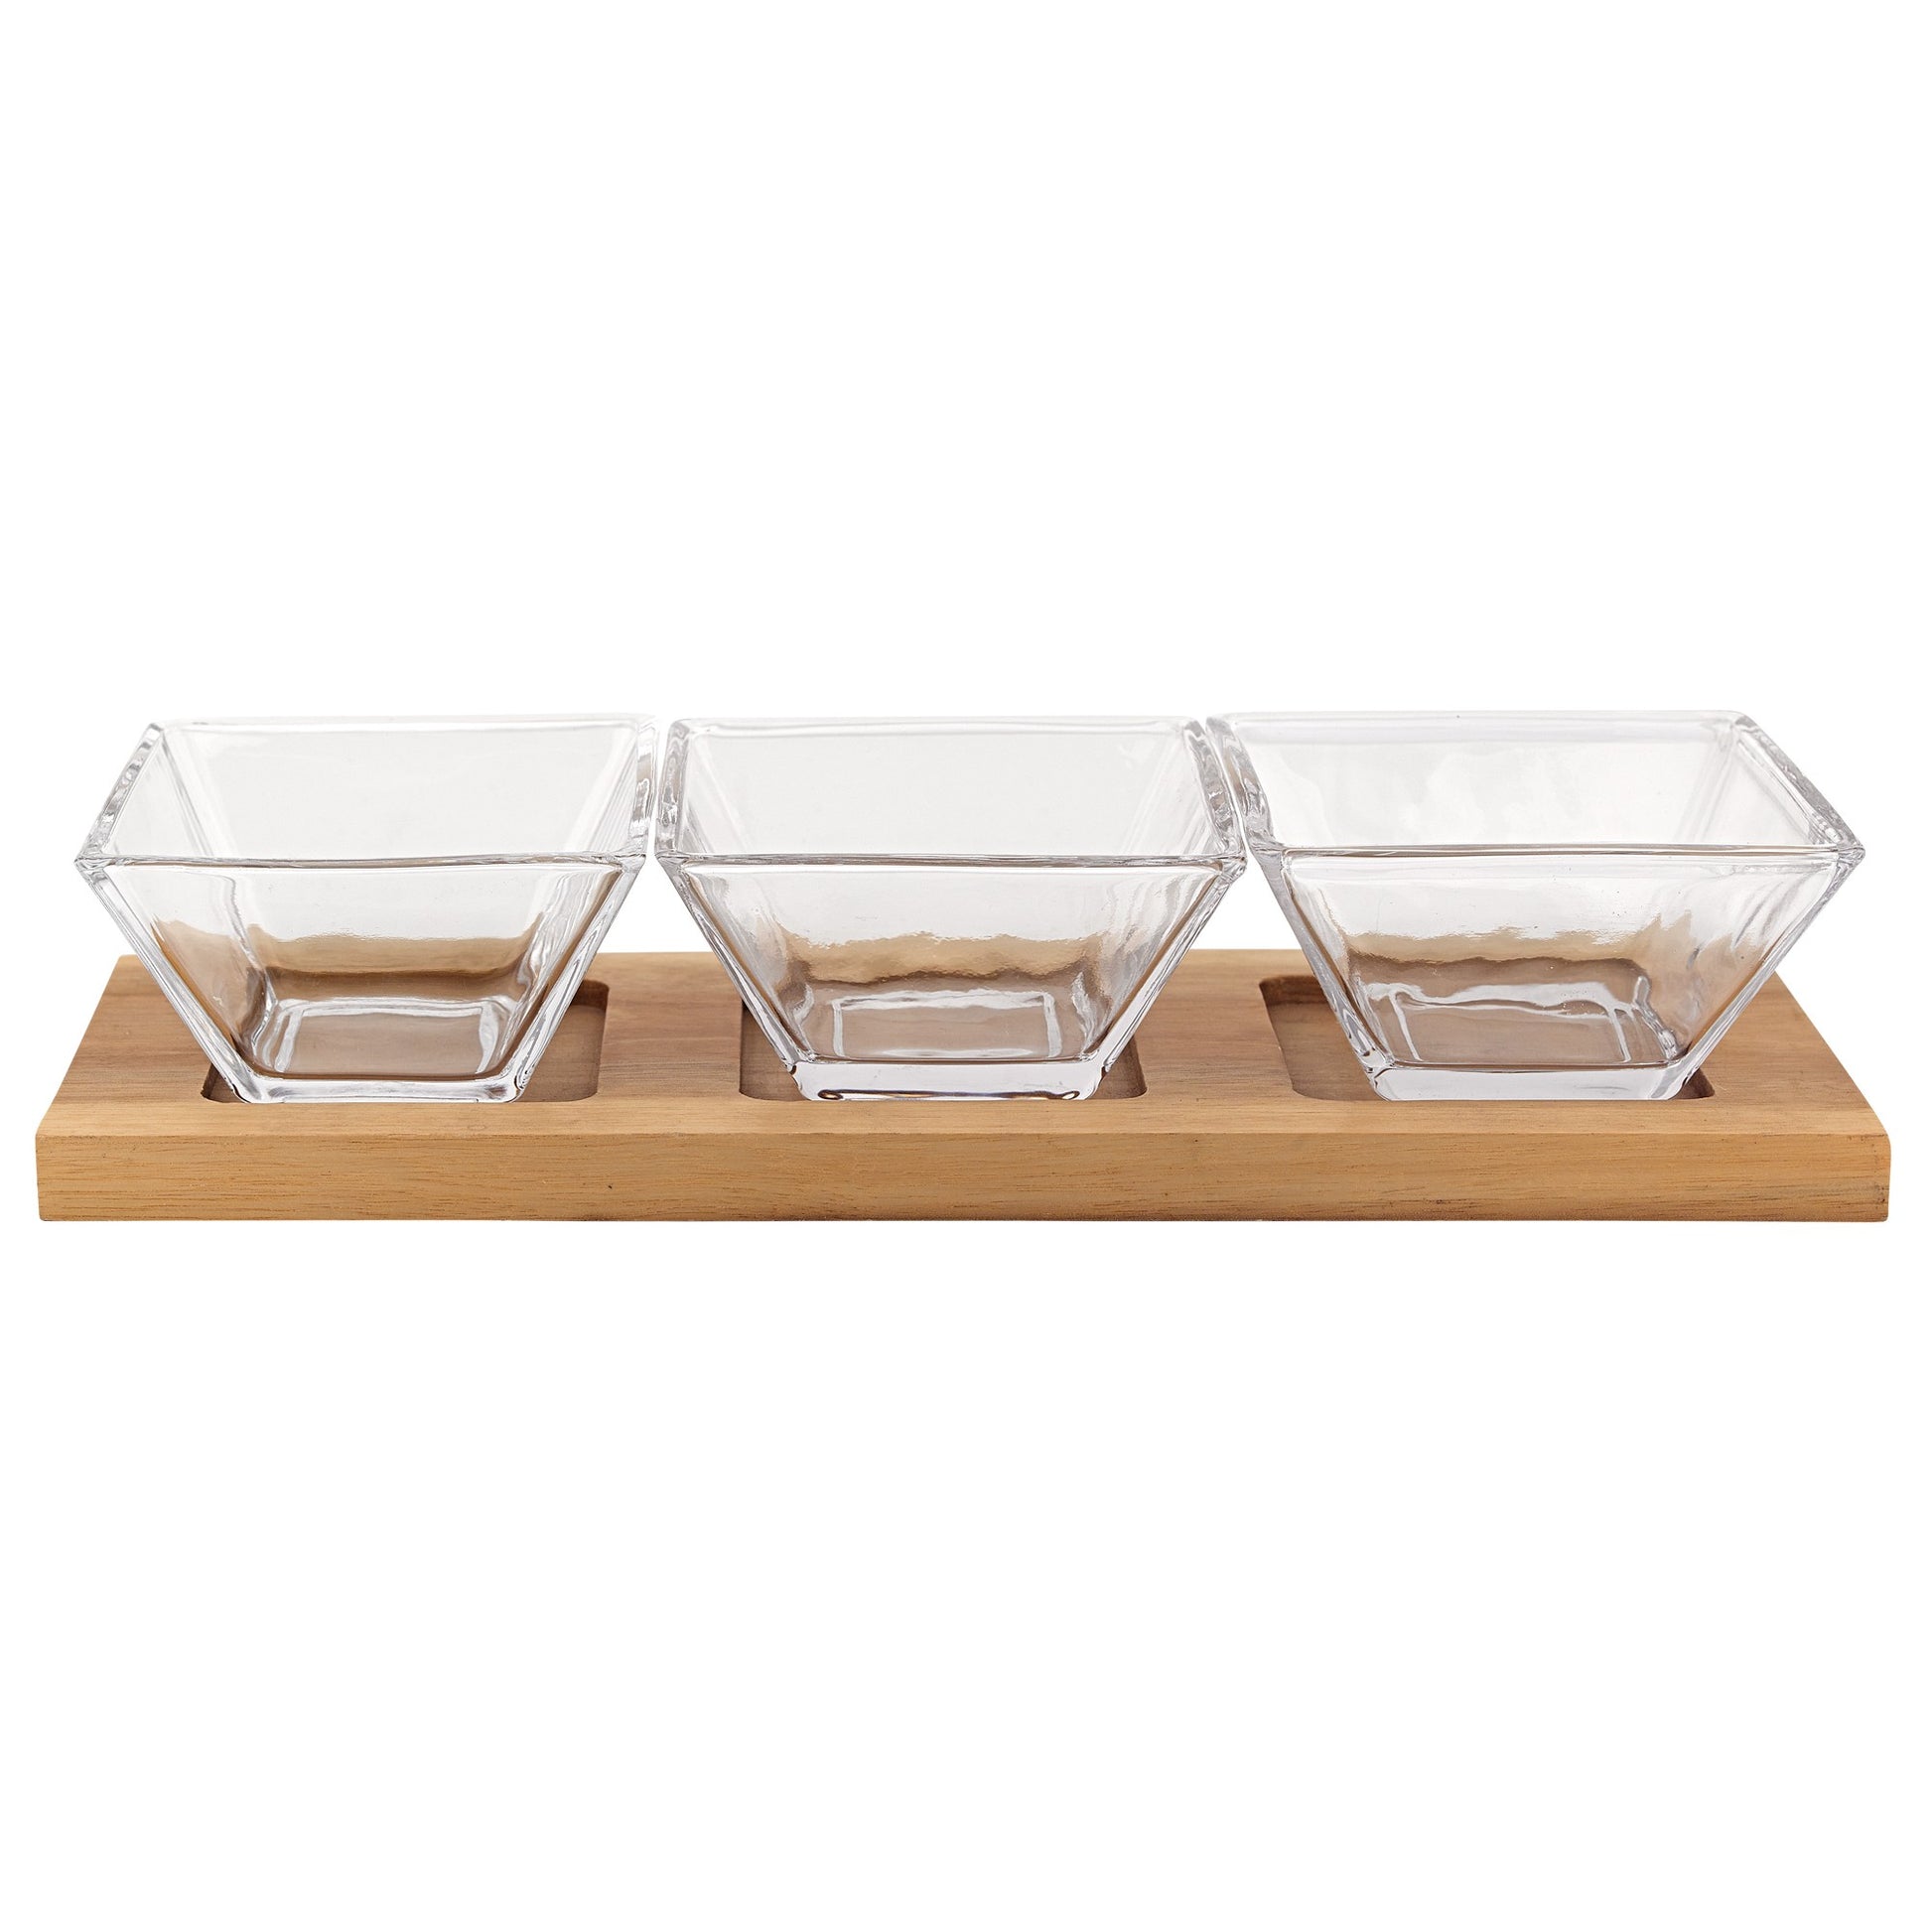 4 Mouth Blown Crystal Hostess Set   4 pc With 3 Glass Condiment or Dip Bowls on a Wood Tray-1